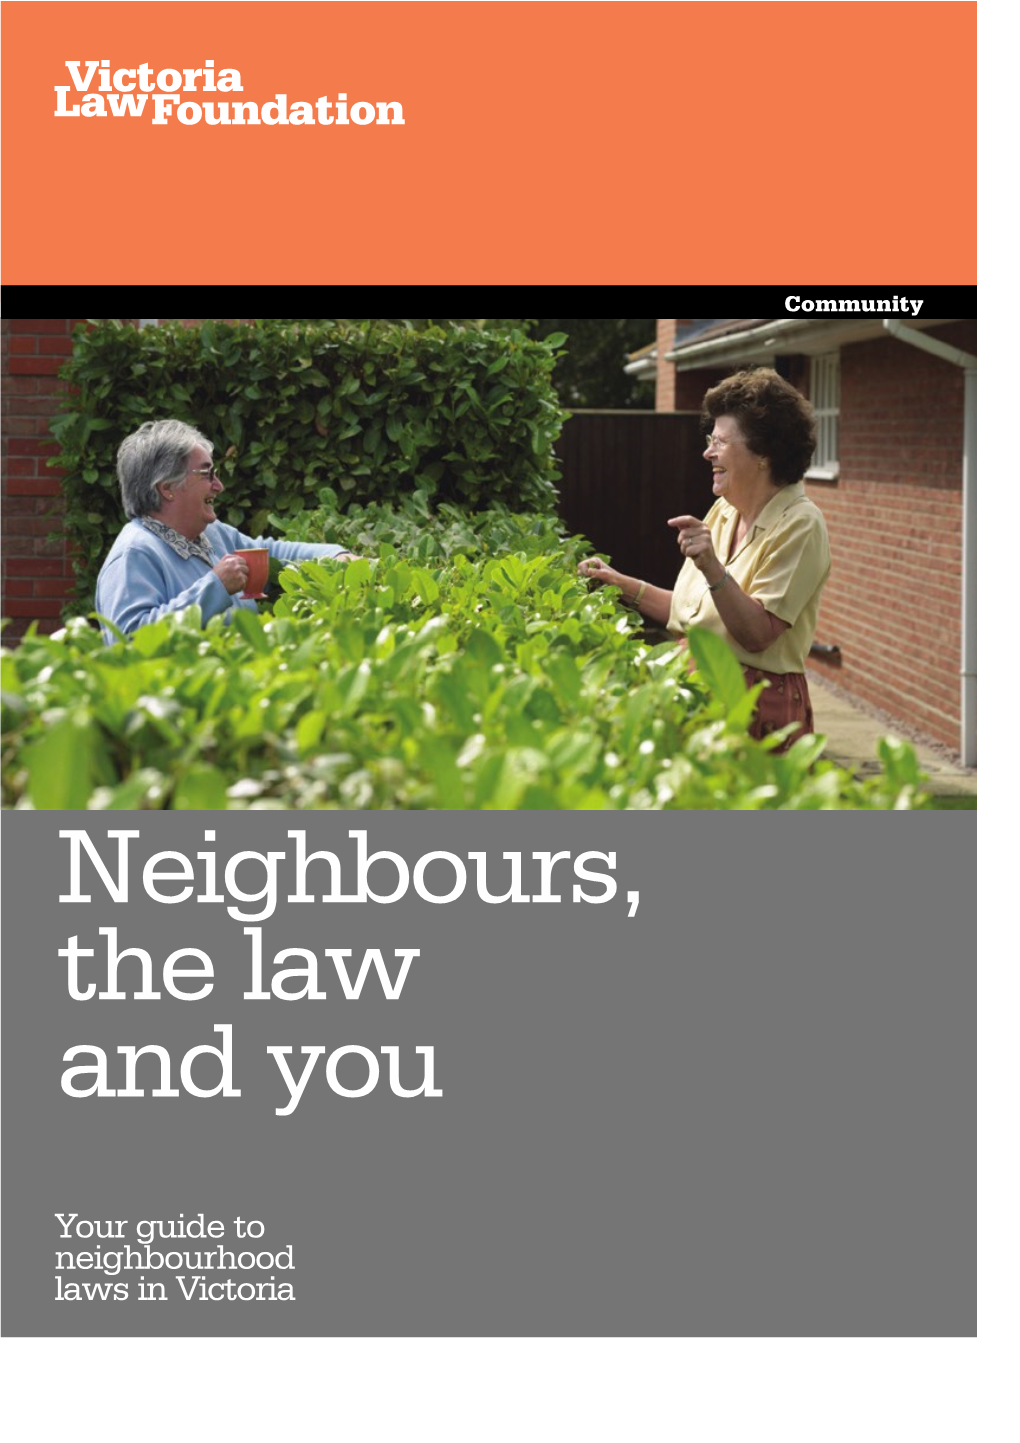 Your Guide to Neighbourhood Laws in Victoria